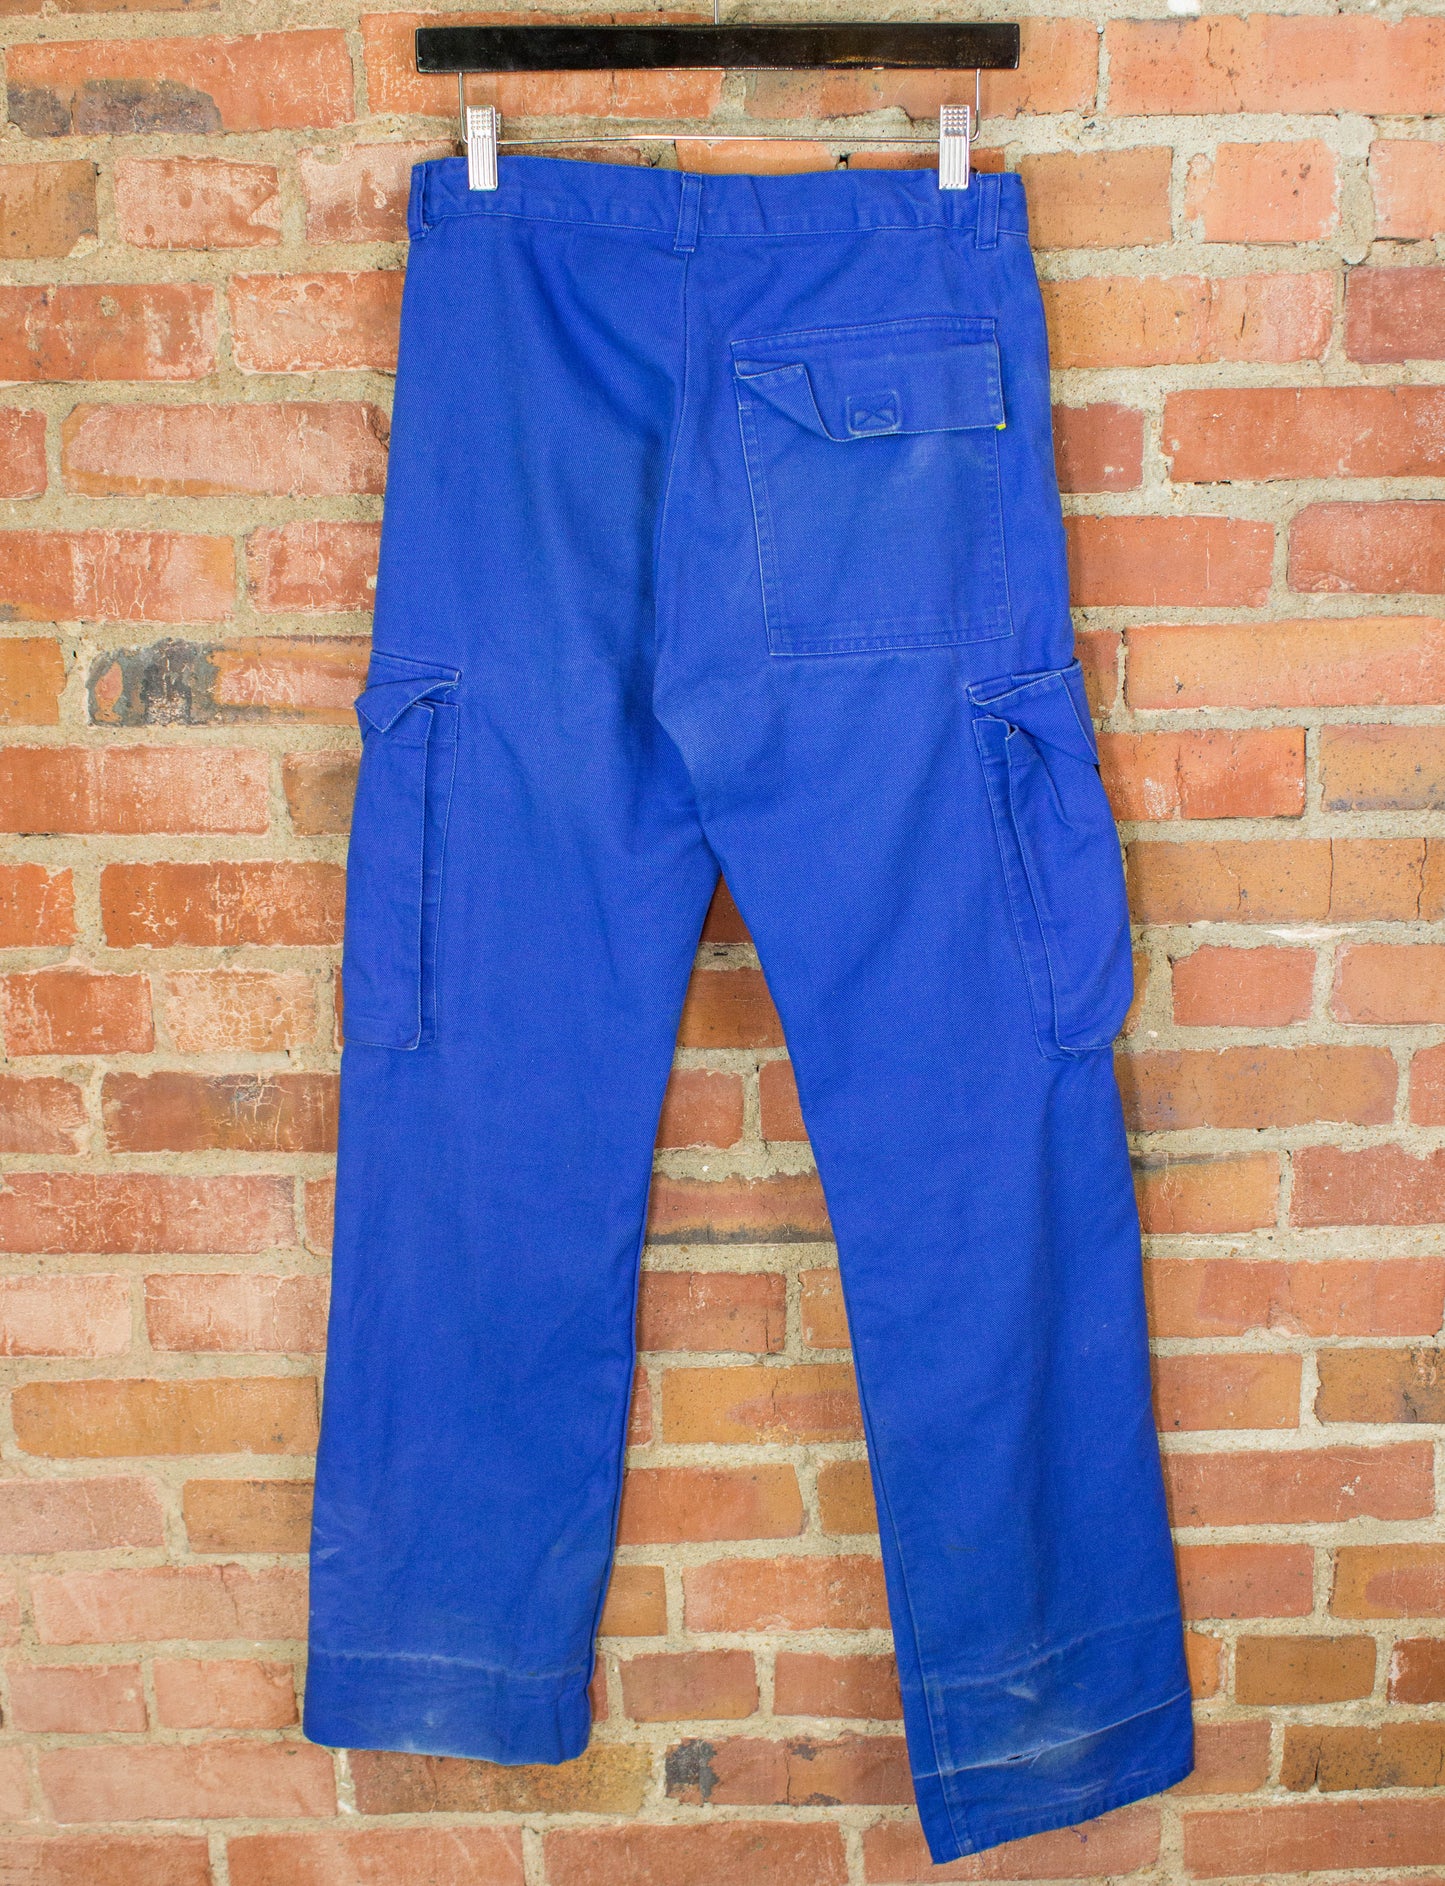 Vintage 80s Light Blue French Cargo Work Pants Size 29x33